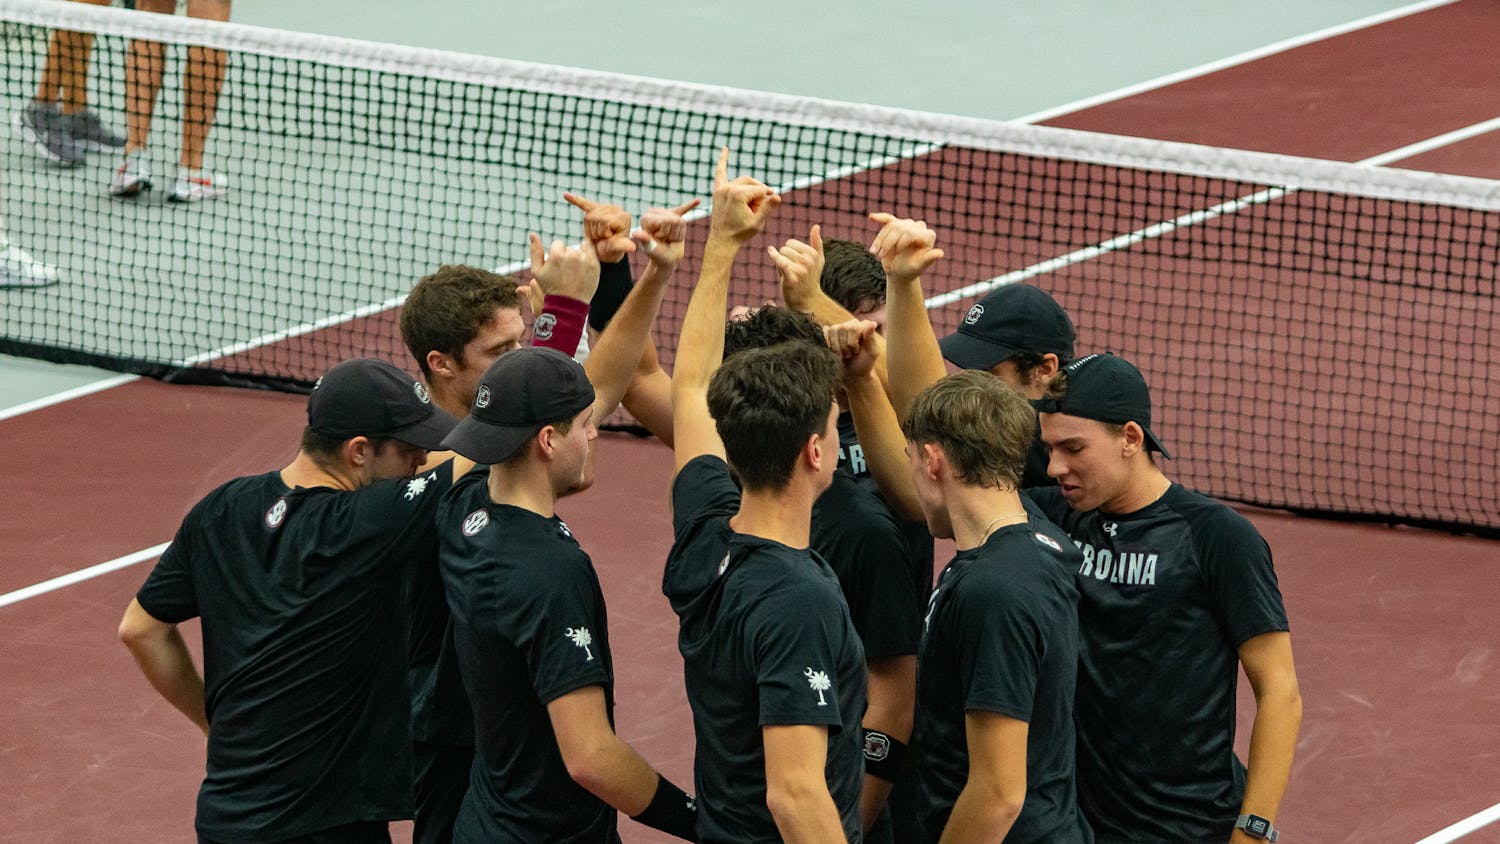 The Men's Tennis team end their team huddle preparing for their matchups on Feb. 4, 2022. The team will face their first ranked opponent, Wake Forest, on Feb. 10.